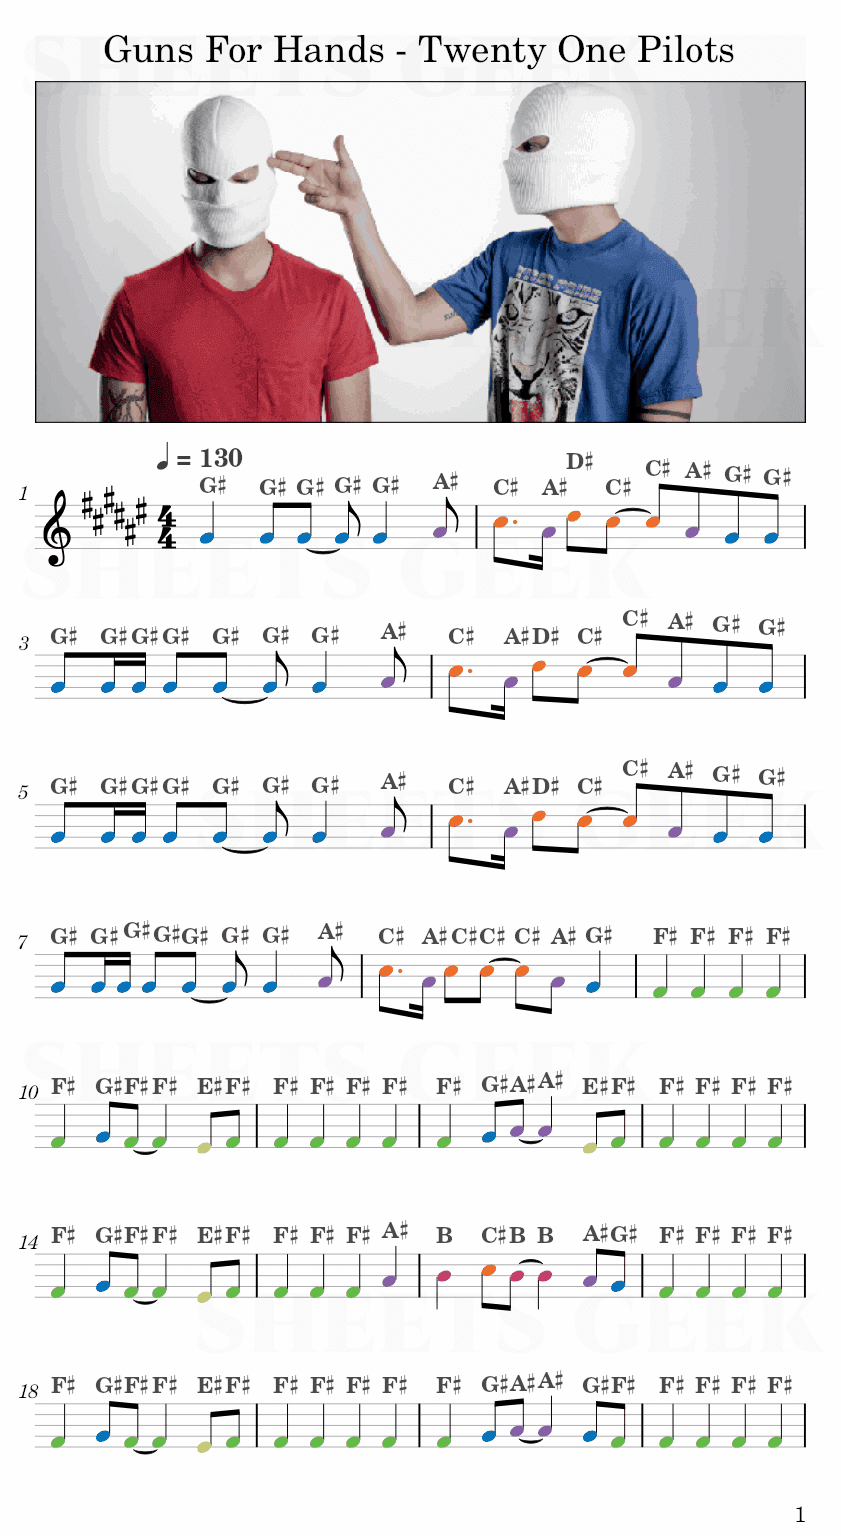 Guns For Hands - Twenty One Pilots Easy Sheet Music Free for piano, keyboard, flute, violin, sax, cello page 1